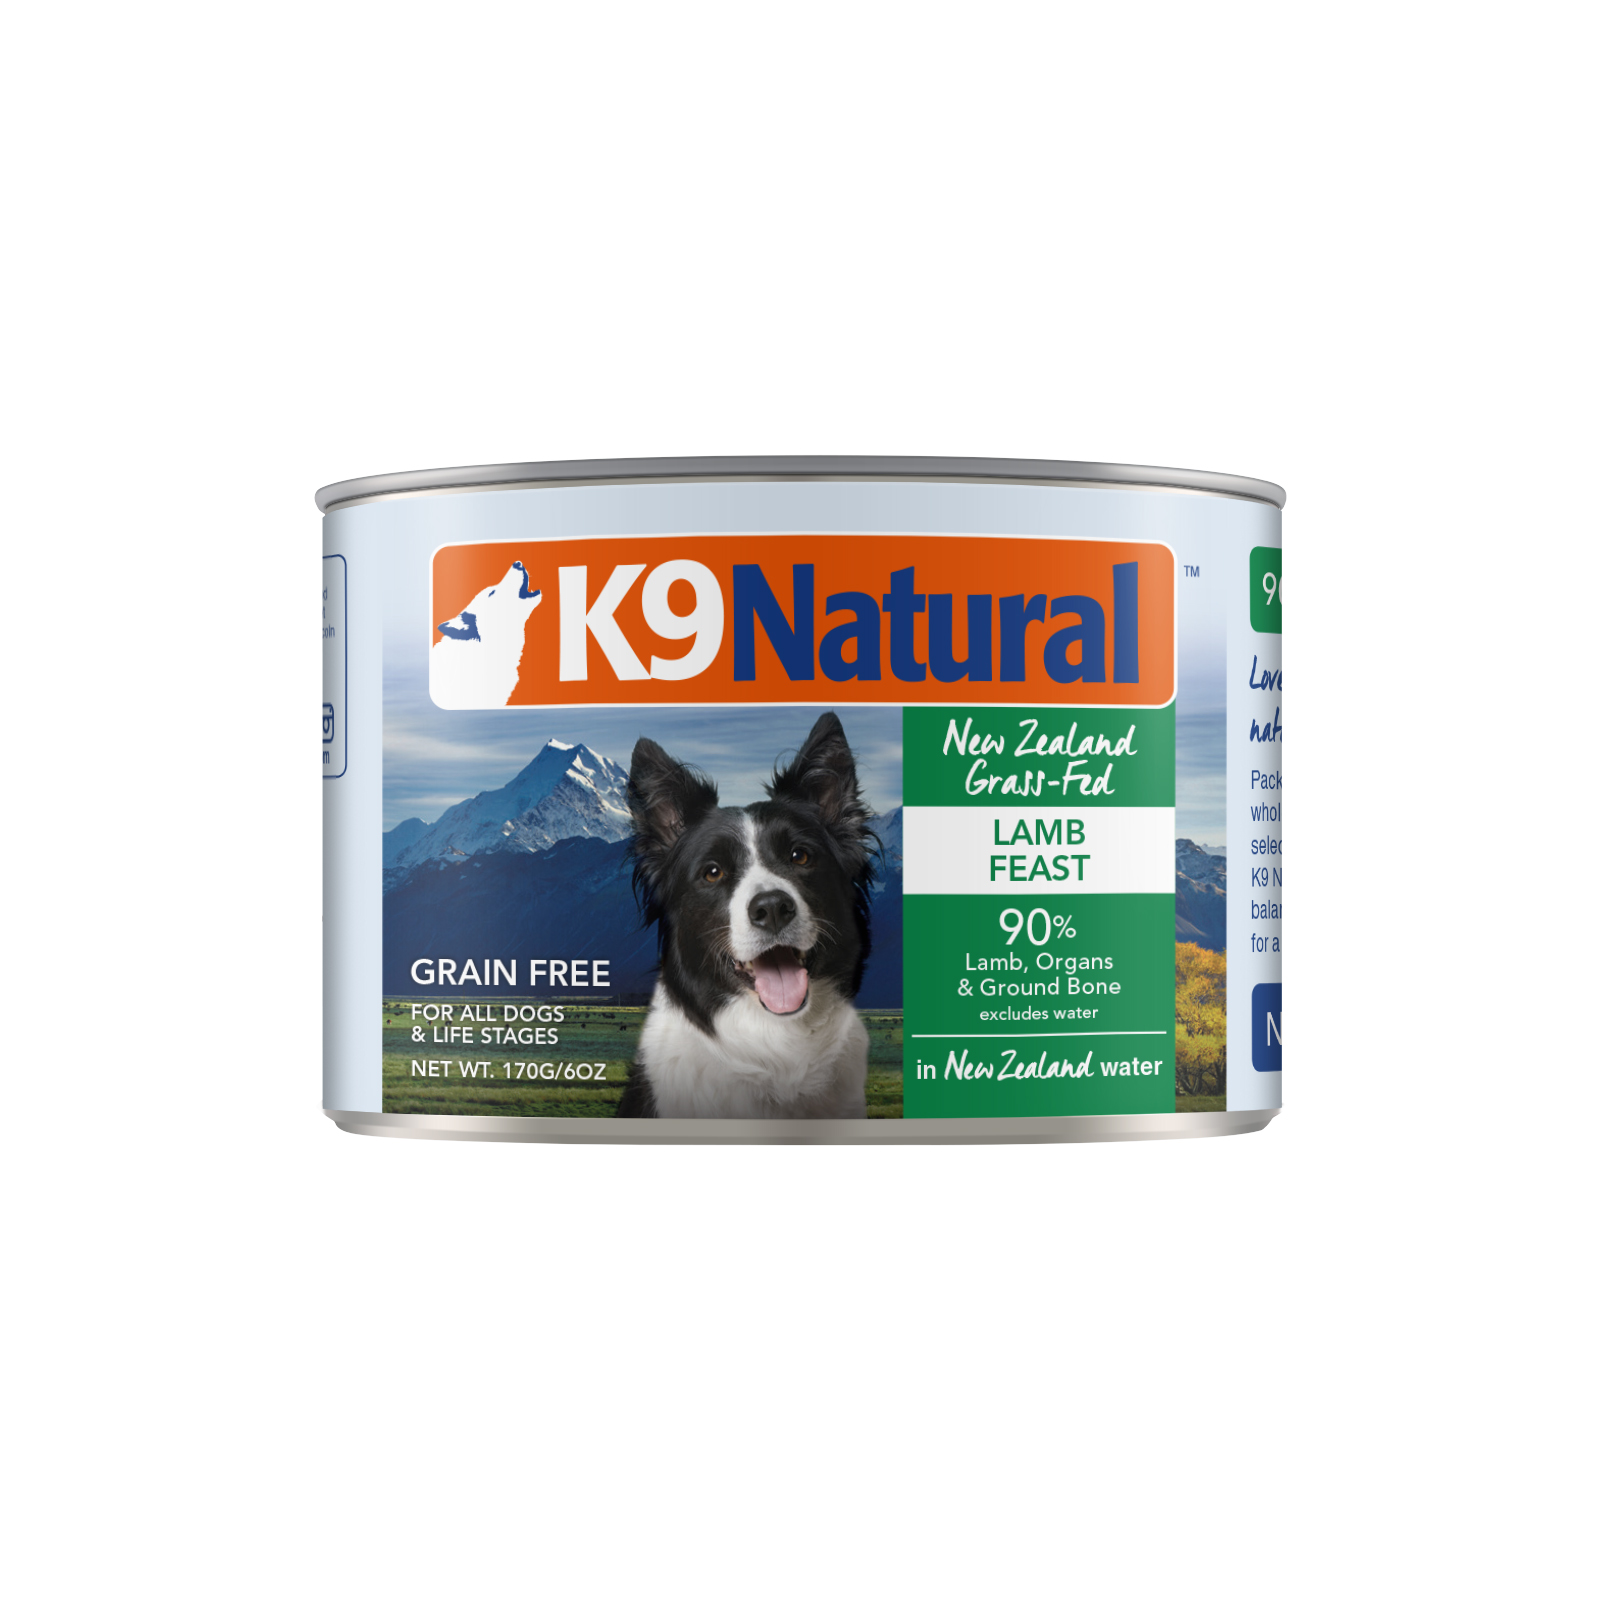 K9 Natural Canned Food